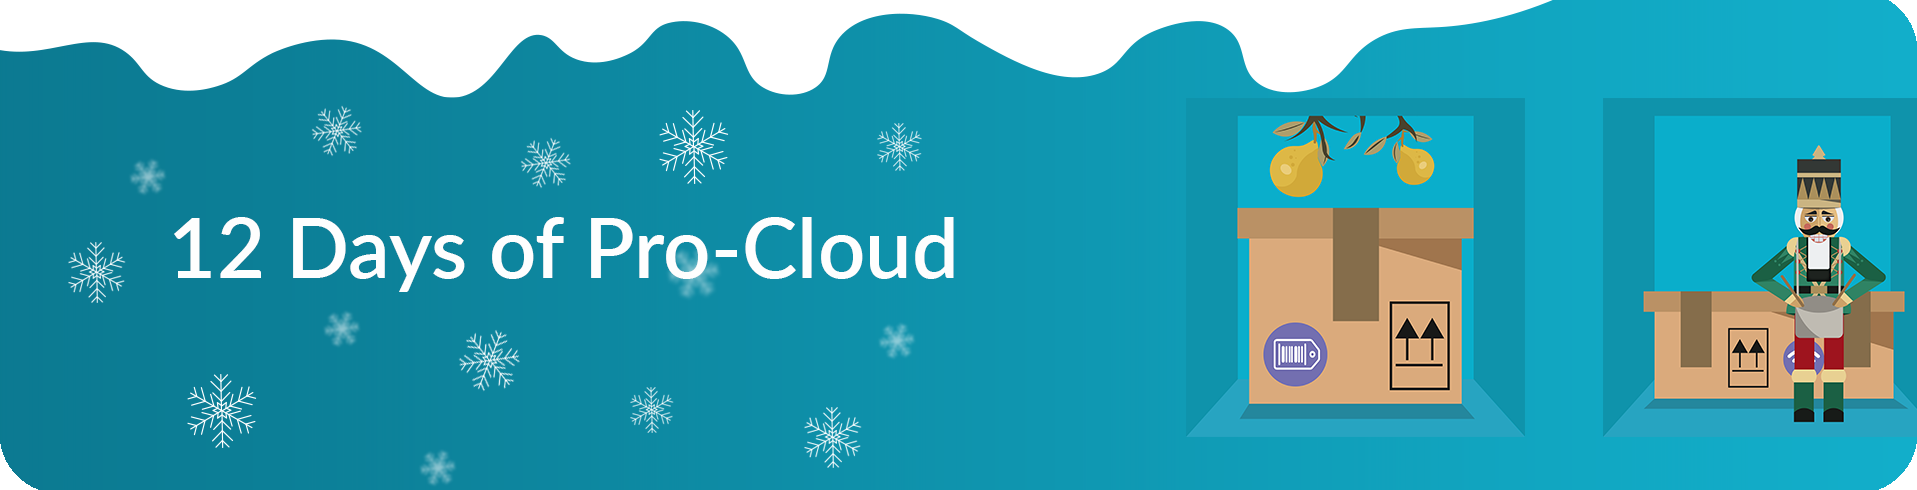 12 days of pro-cloud banner